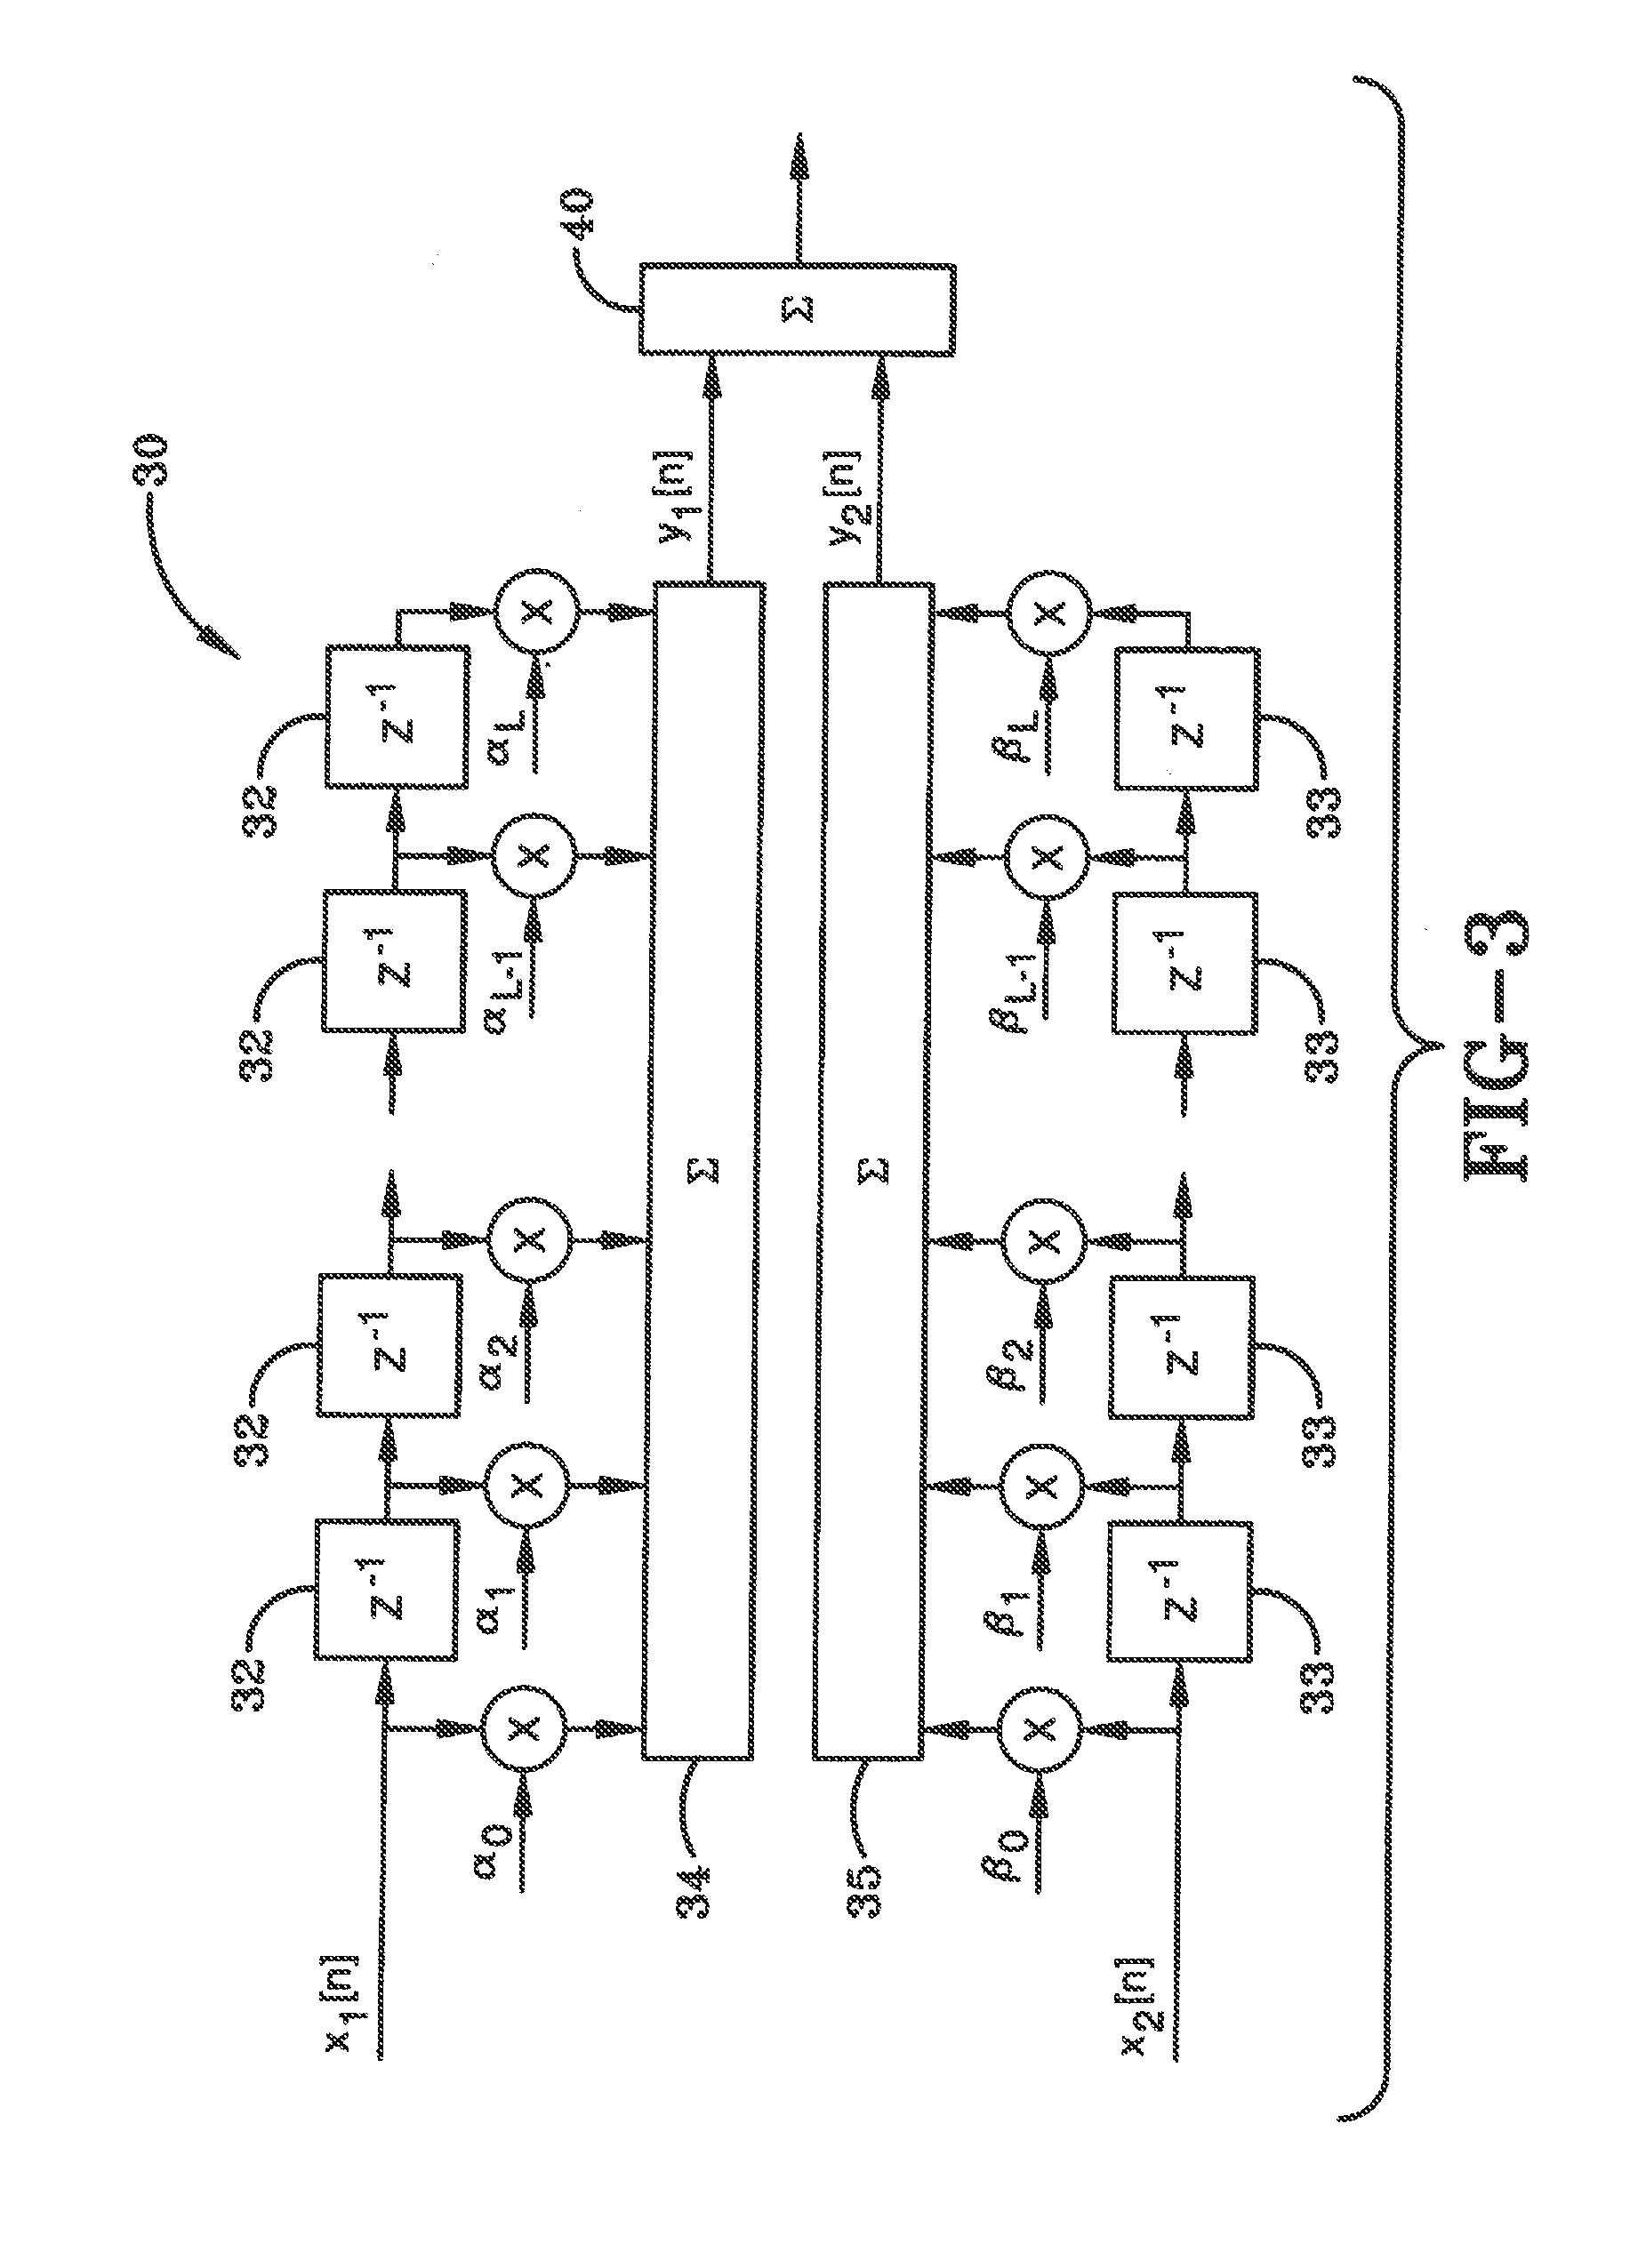 System and algorithm for multipath mitigation